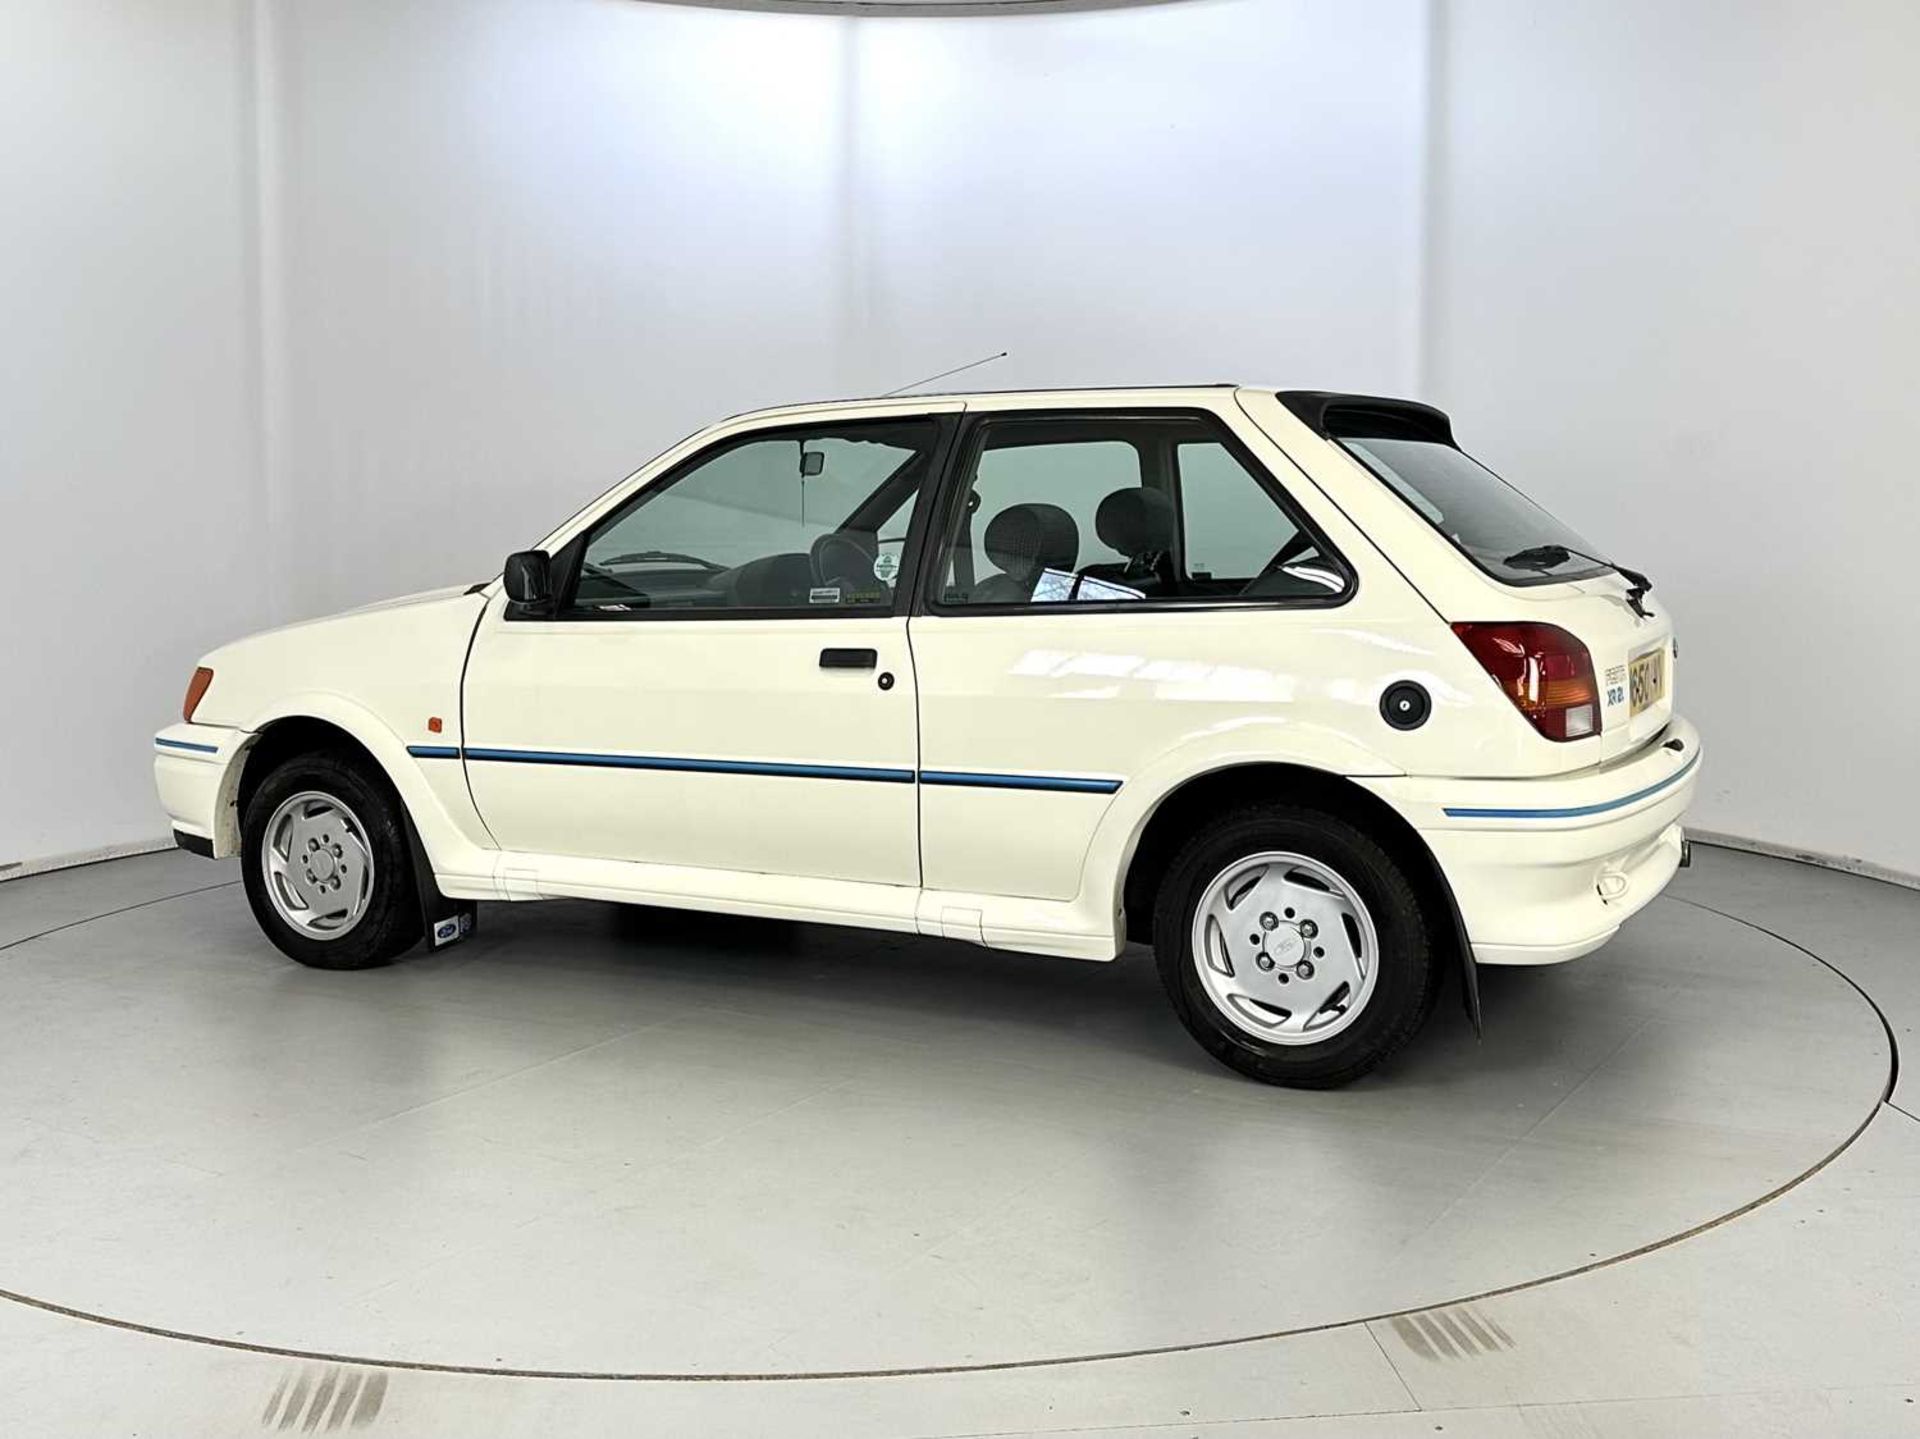 1991 Ford Fiesta XR2i - Image 6 of 30